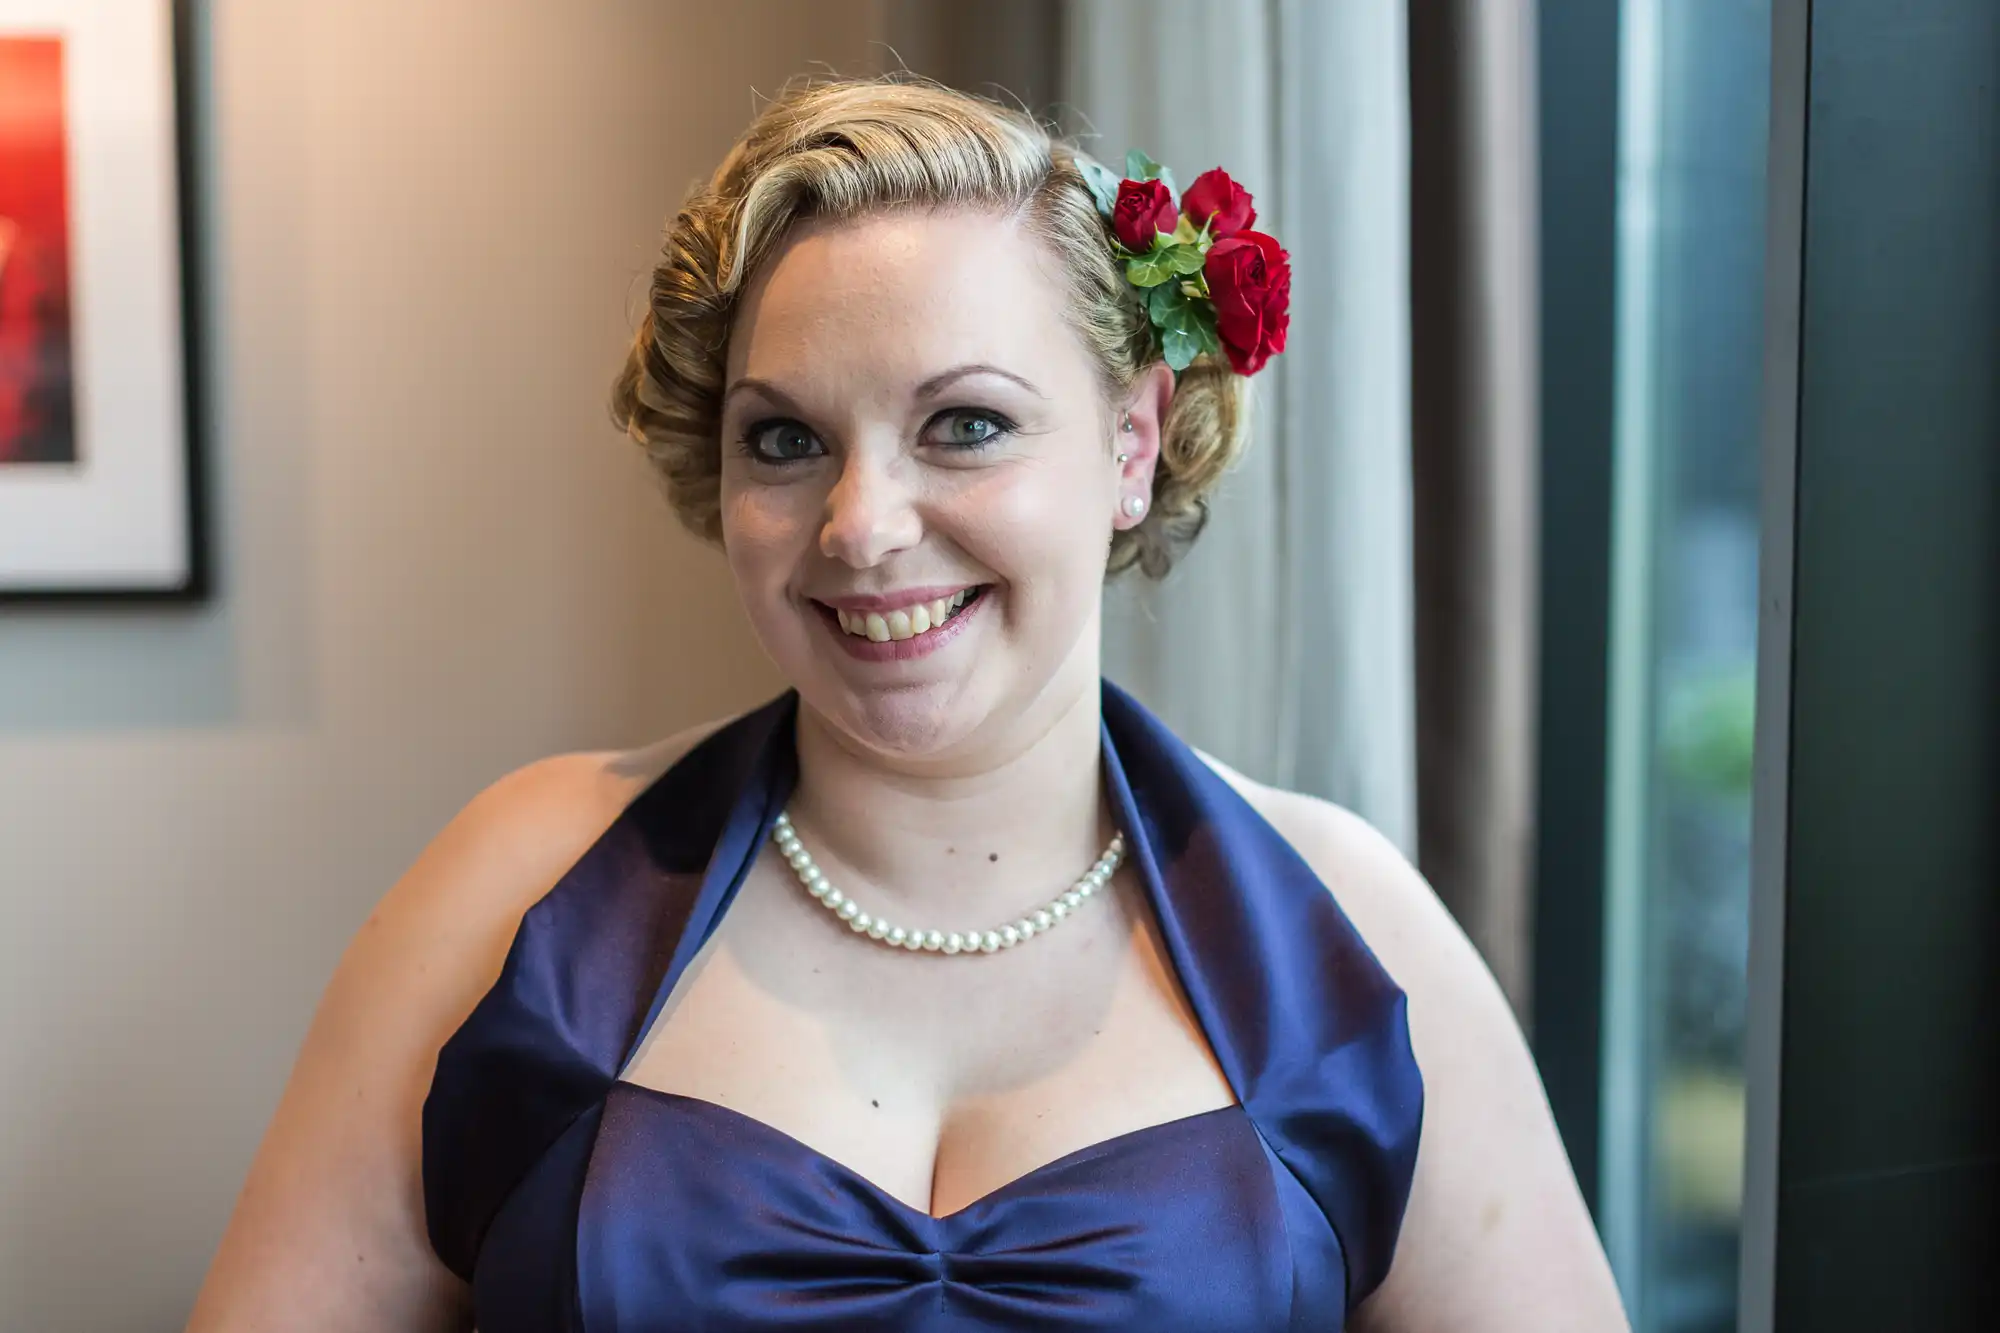 A woman in a blue dress with a pearl necklace, smiling at the camera, her hair styled with red flowers.